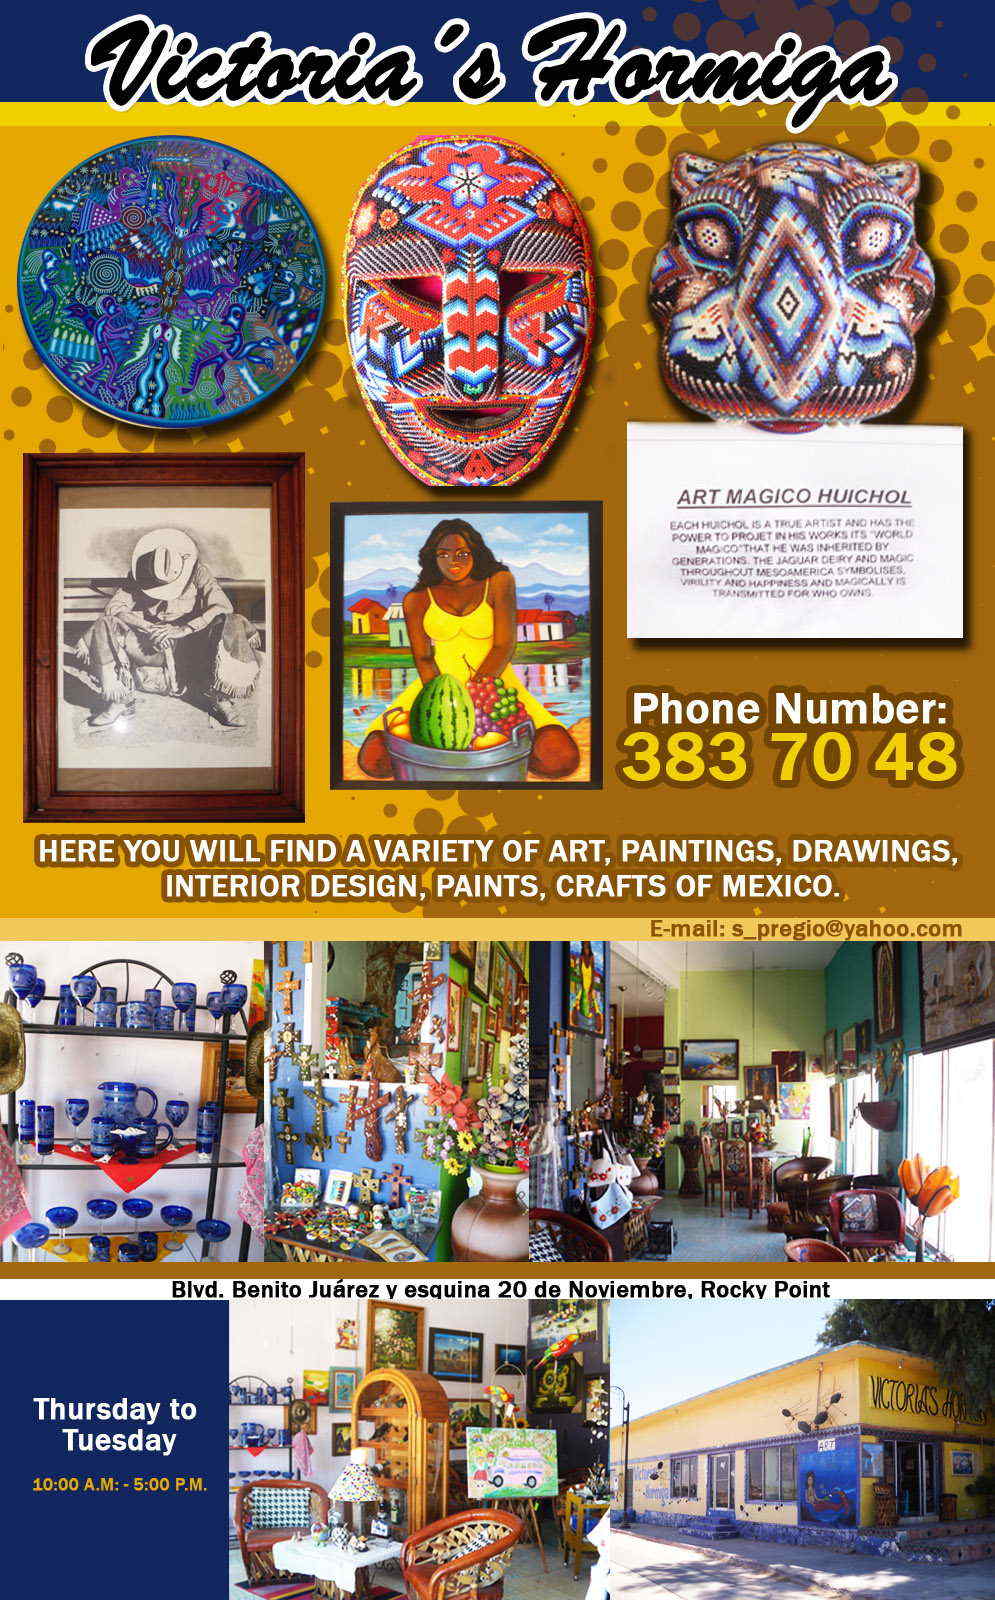 Victorias Hormiga-HERE YOU WILL FIND A VARIETY OF ART, PAINTINGS, DRAWINGS, INTERIOR DESIGN, PAINTS, CRAFTS OF MEXICO.    